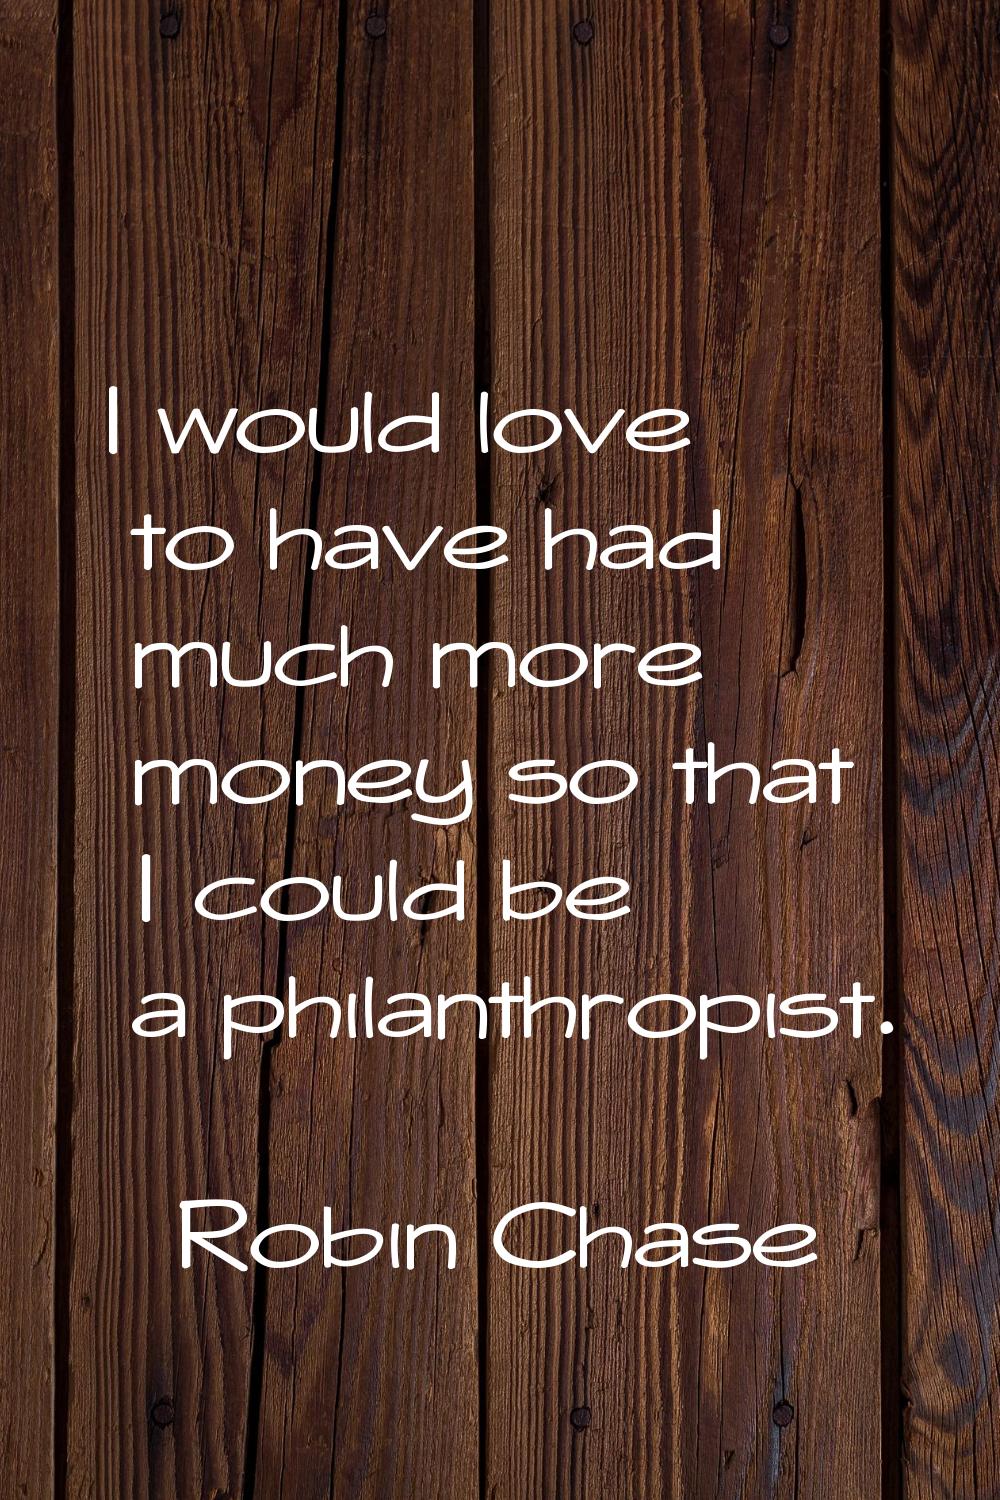 I would love to have had much more money so that I could be a philanthropist.